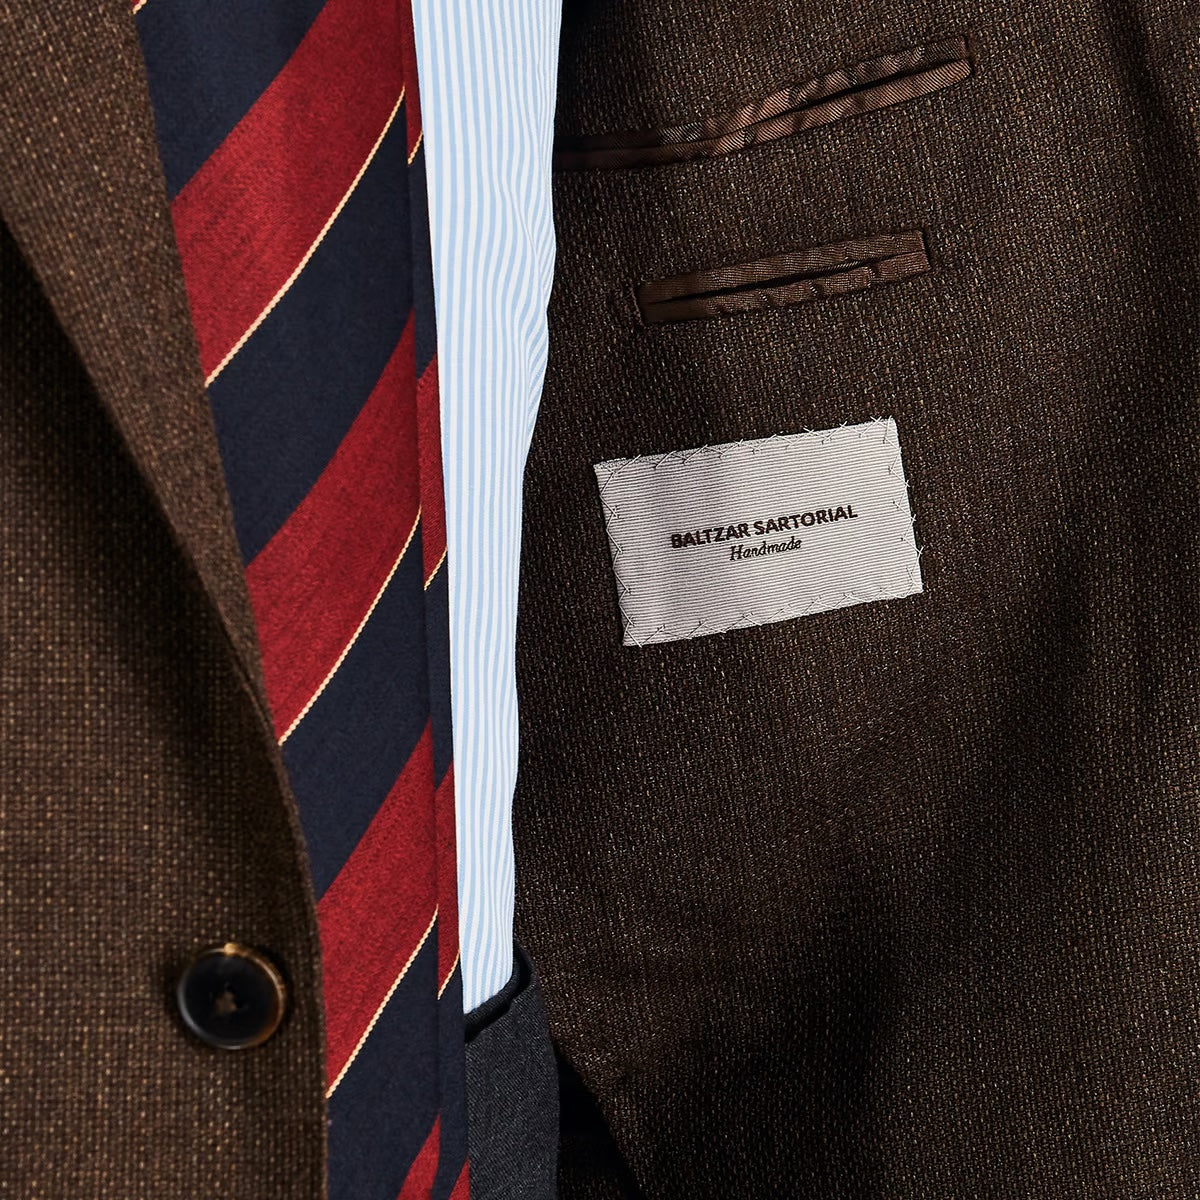 Close-up of a brown tweed jacket with a "Baltzar Sartorial Handmade" label, partially visible striped shirt, and a red and blue striped tie featuring Baltzar Sartorial tailored clothing.